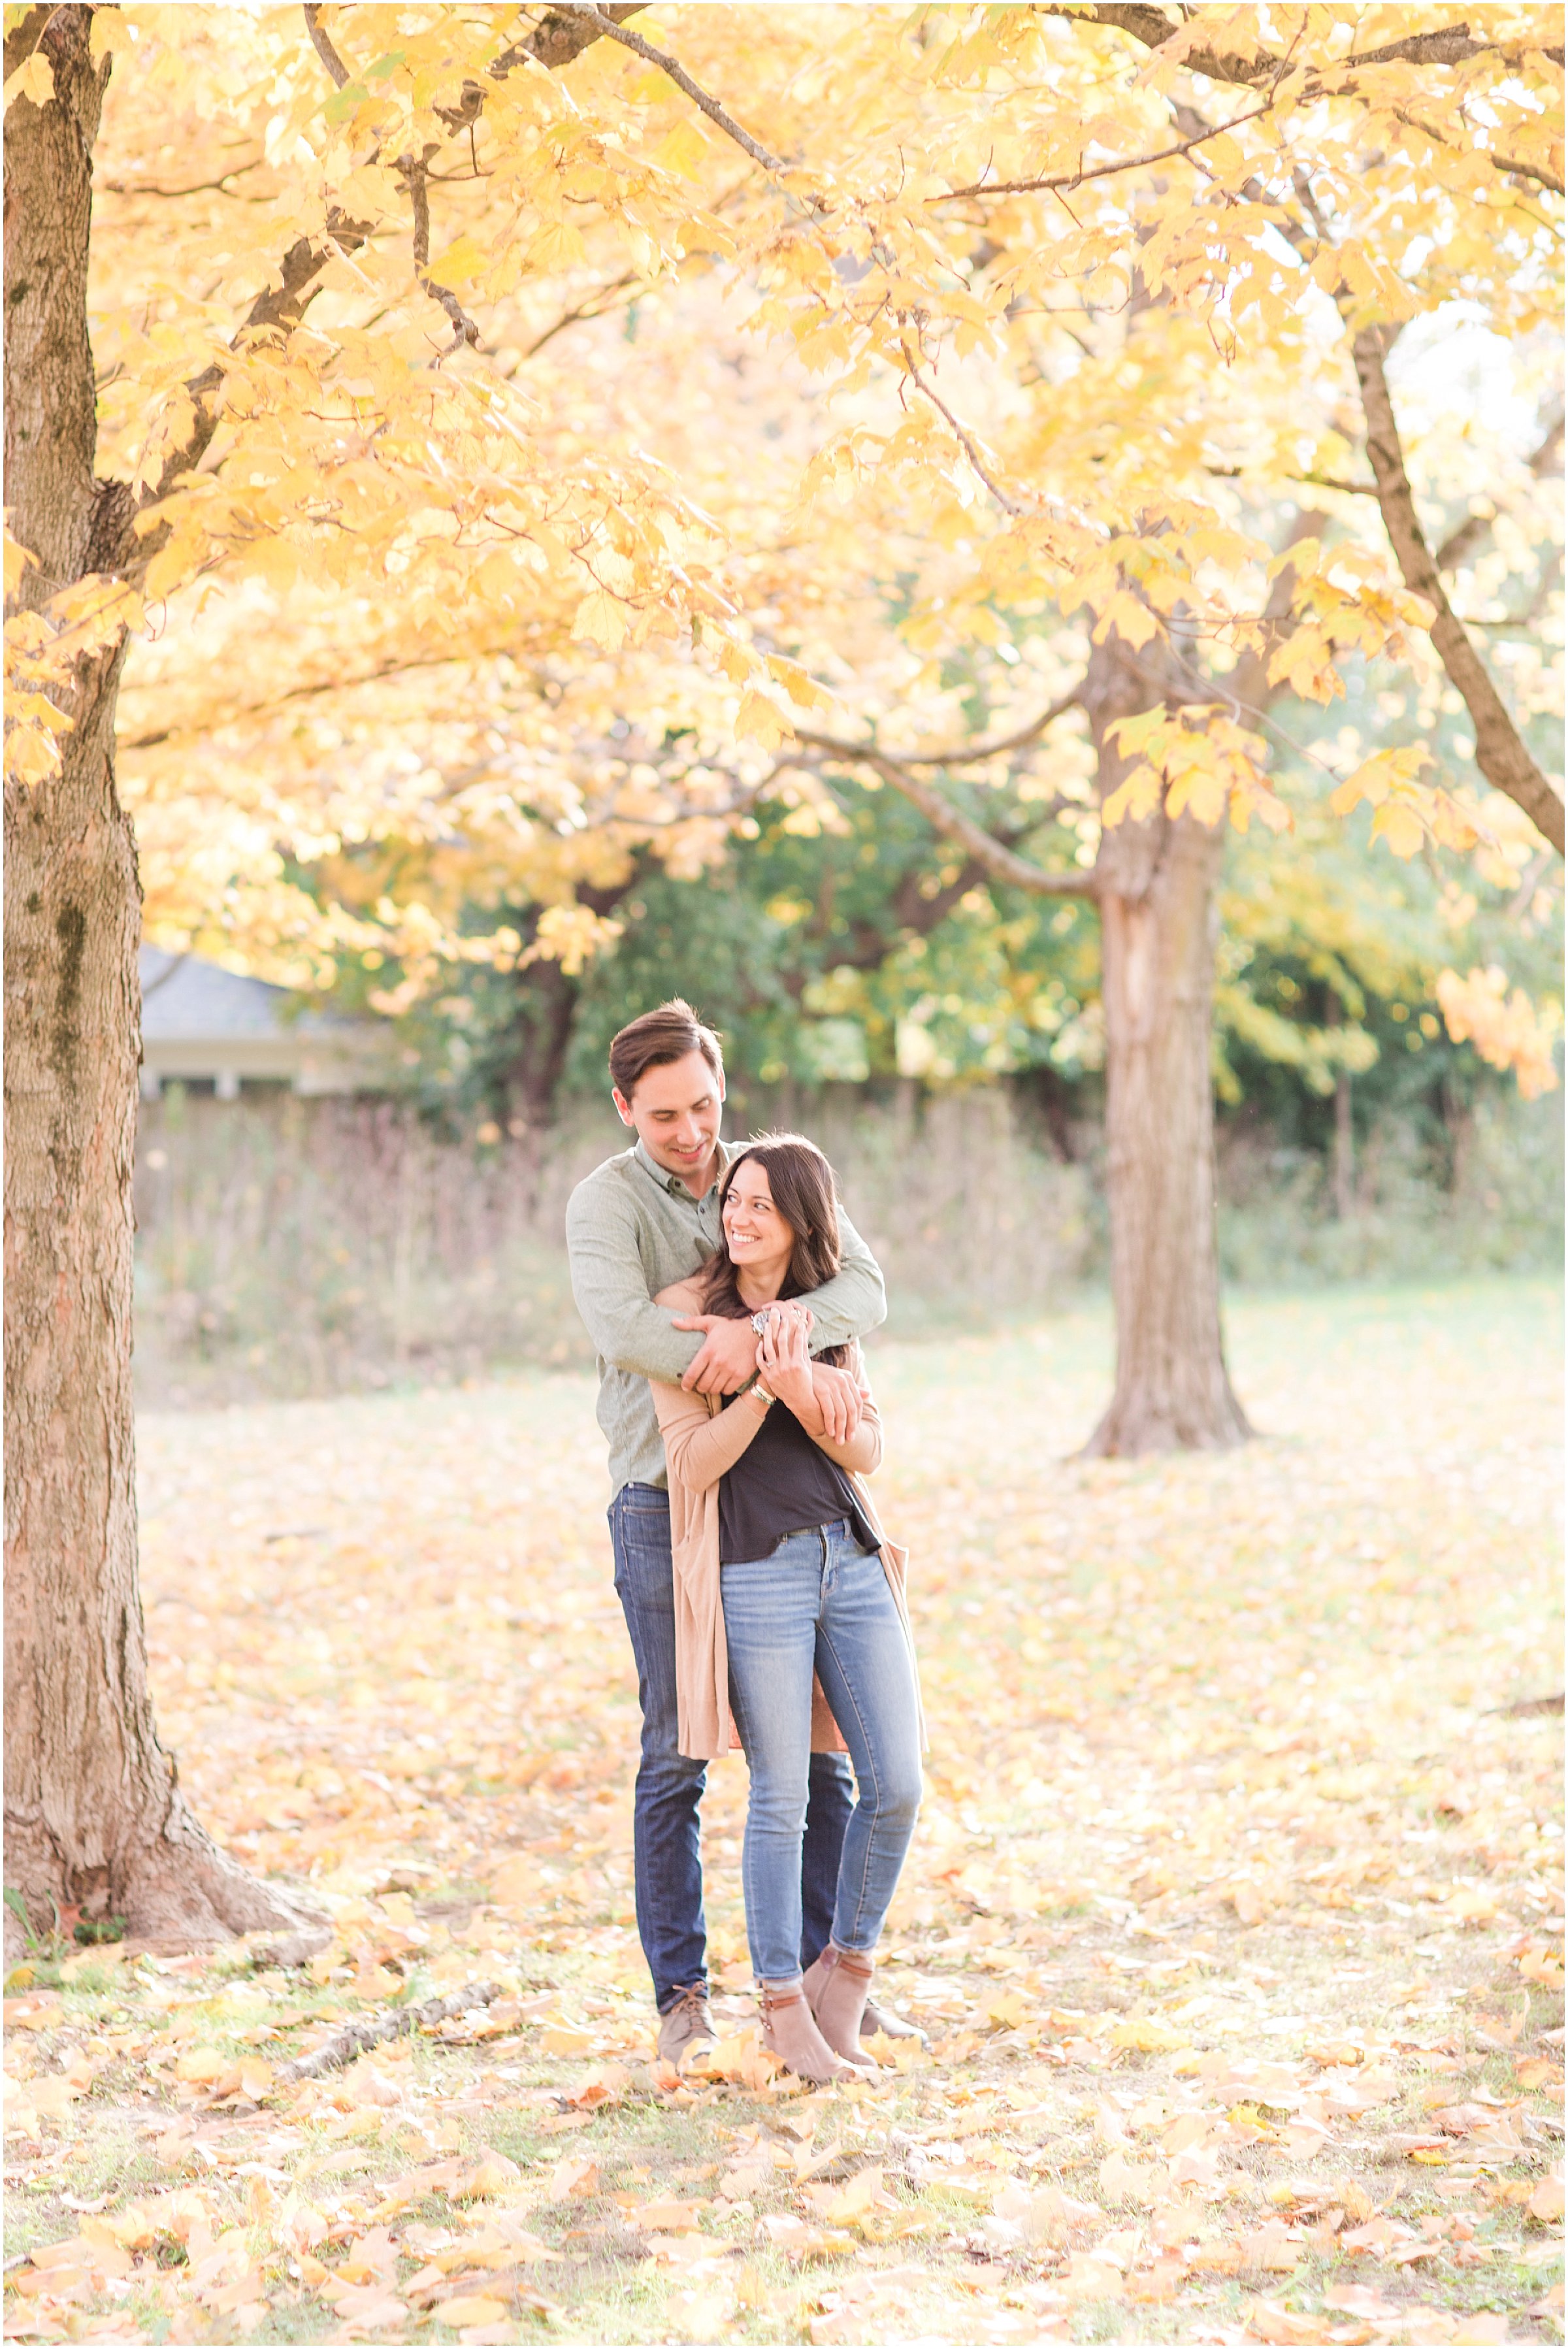 Locally Grown Gardens Engagement Session_0026.jpg